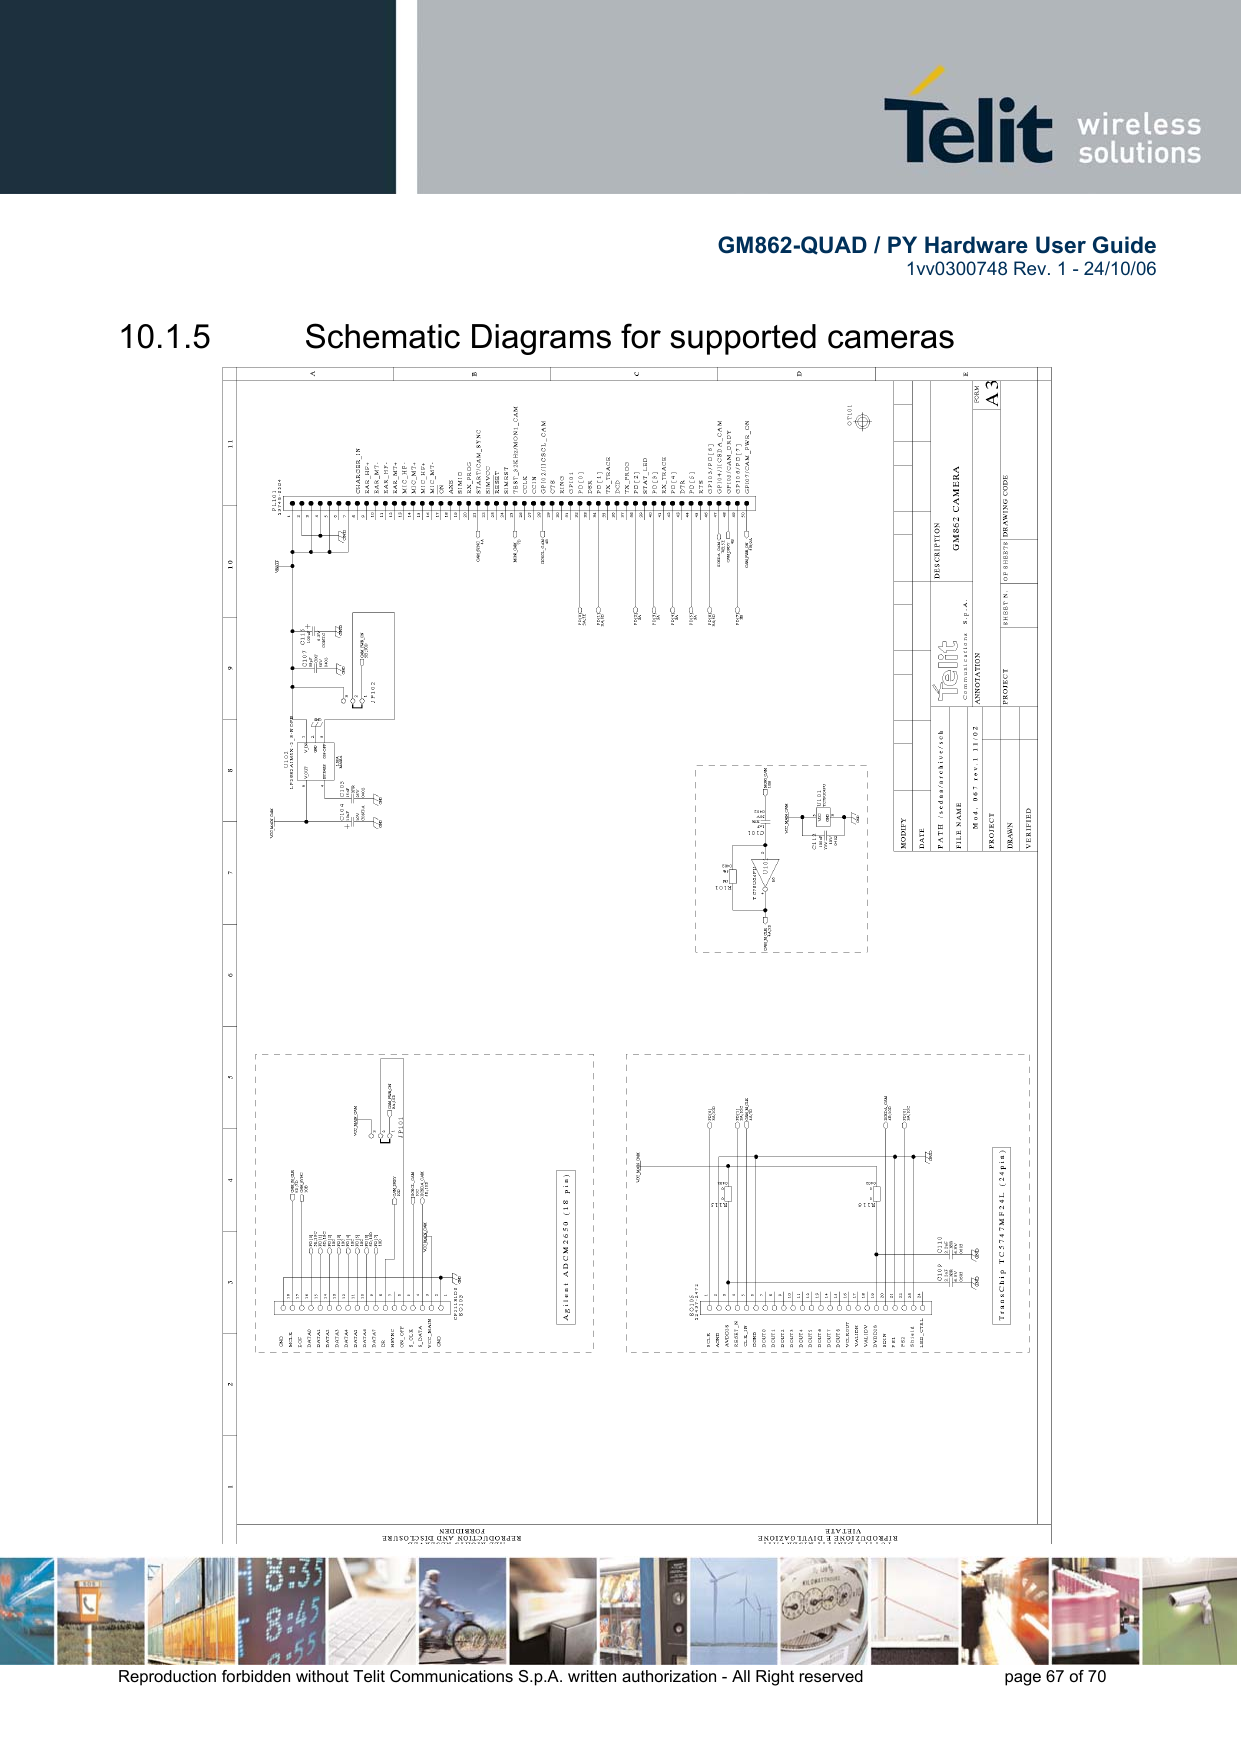        GM862-QUAD / PY Hardware User Guide   1vv0300748 Rev. 1 - 24/10/06    Reproduction forbidden without Telit Communications S.p.A. written authorization - All Right reserved    page 67 of 70  10.1.5   Schematic Diagrams for supported cameras 